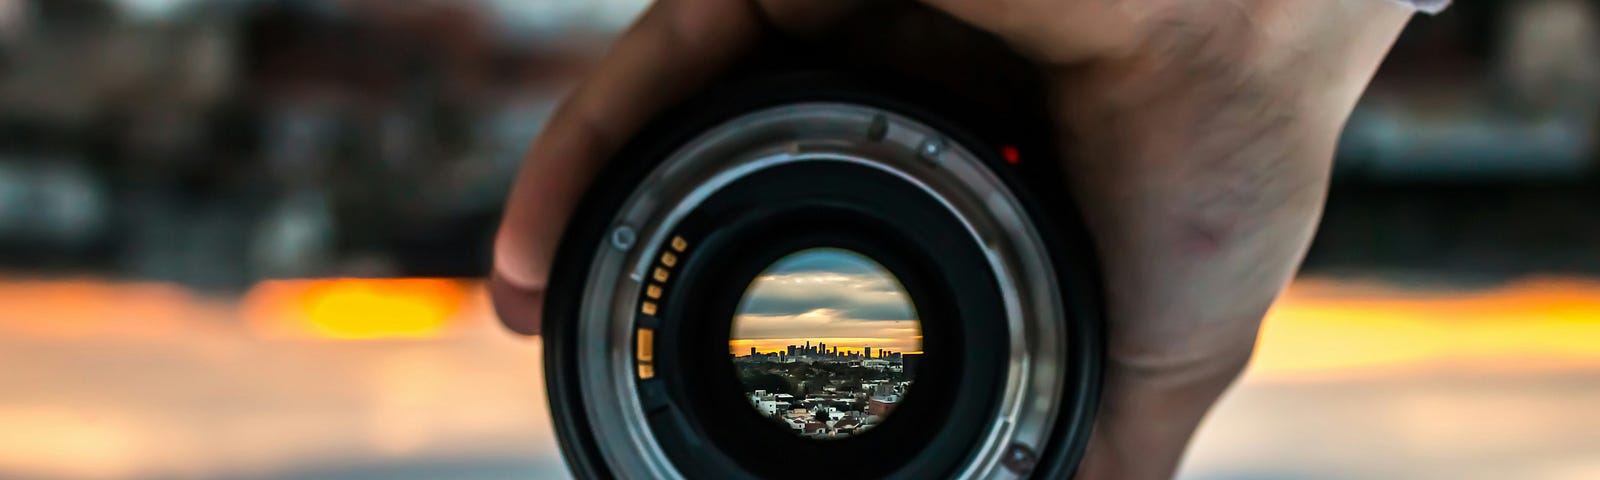 A lens of a camera focusing on the city skyline